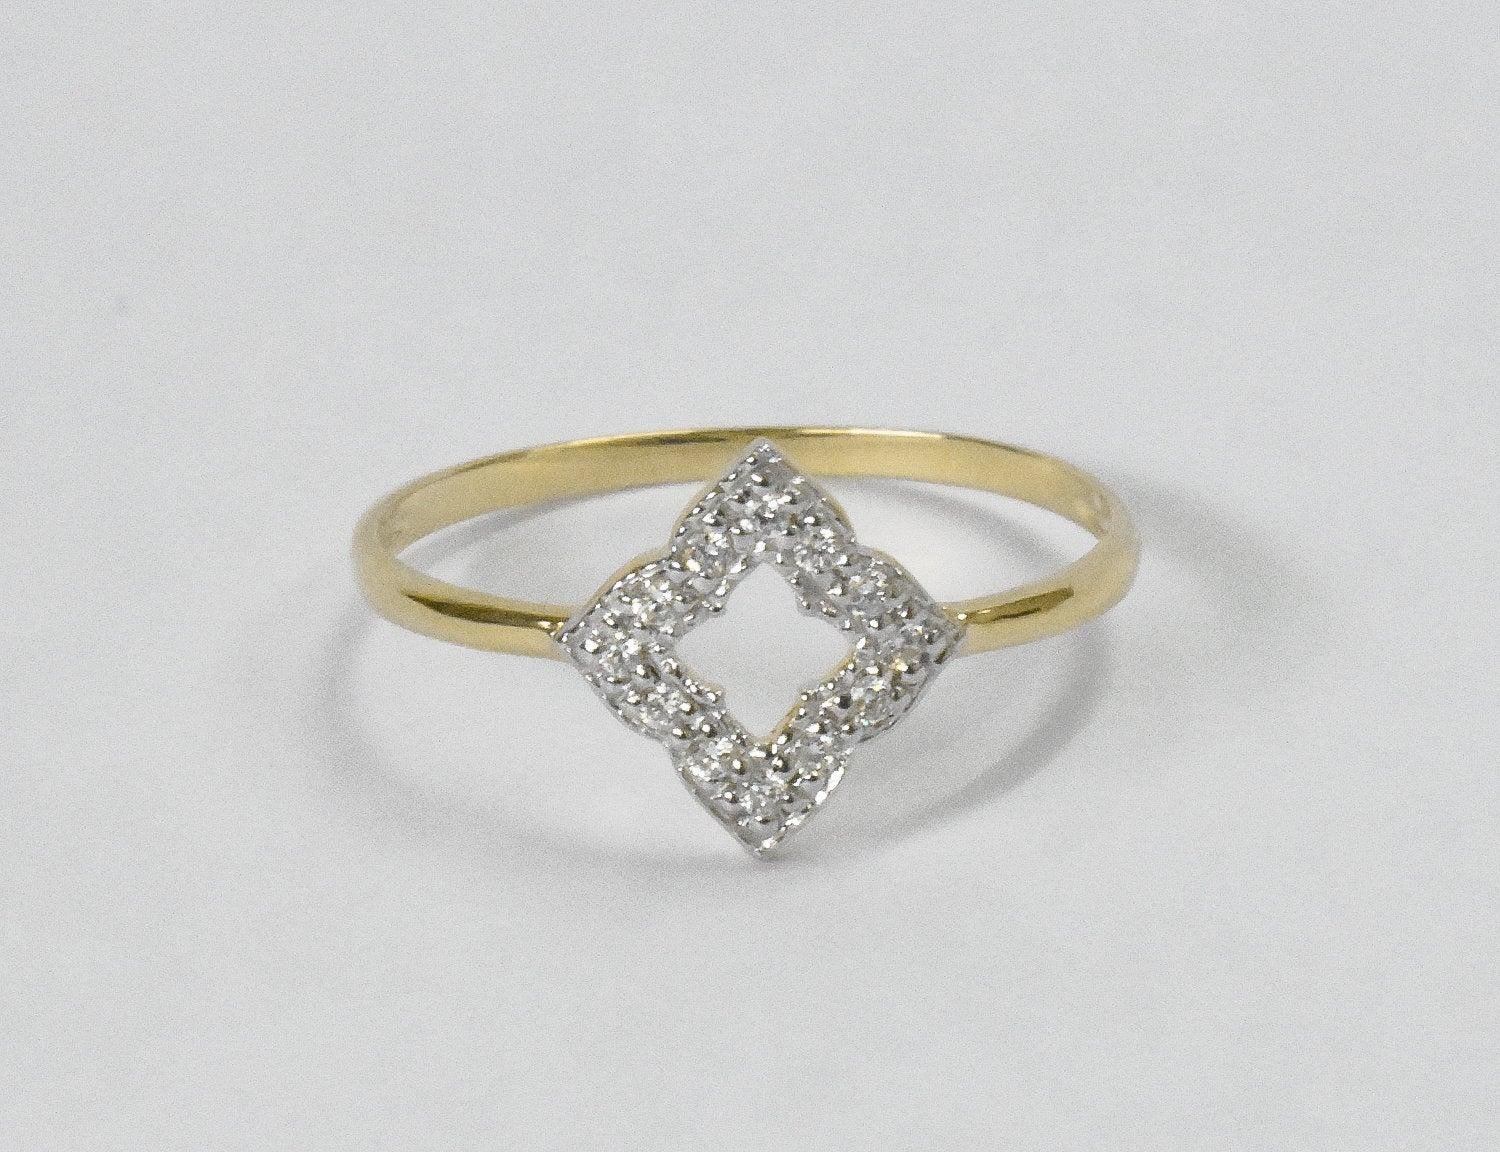 For Sale:  18k Gold Diamond Clover Ring Engagement Ring Stackable Diamond Ring 3